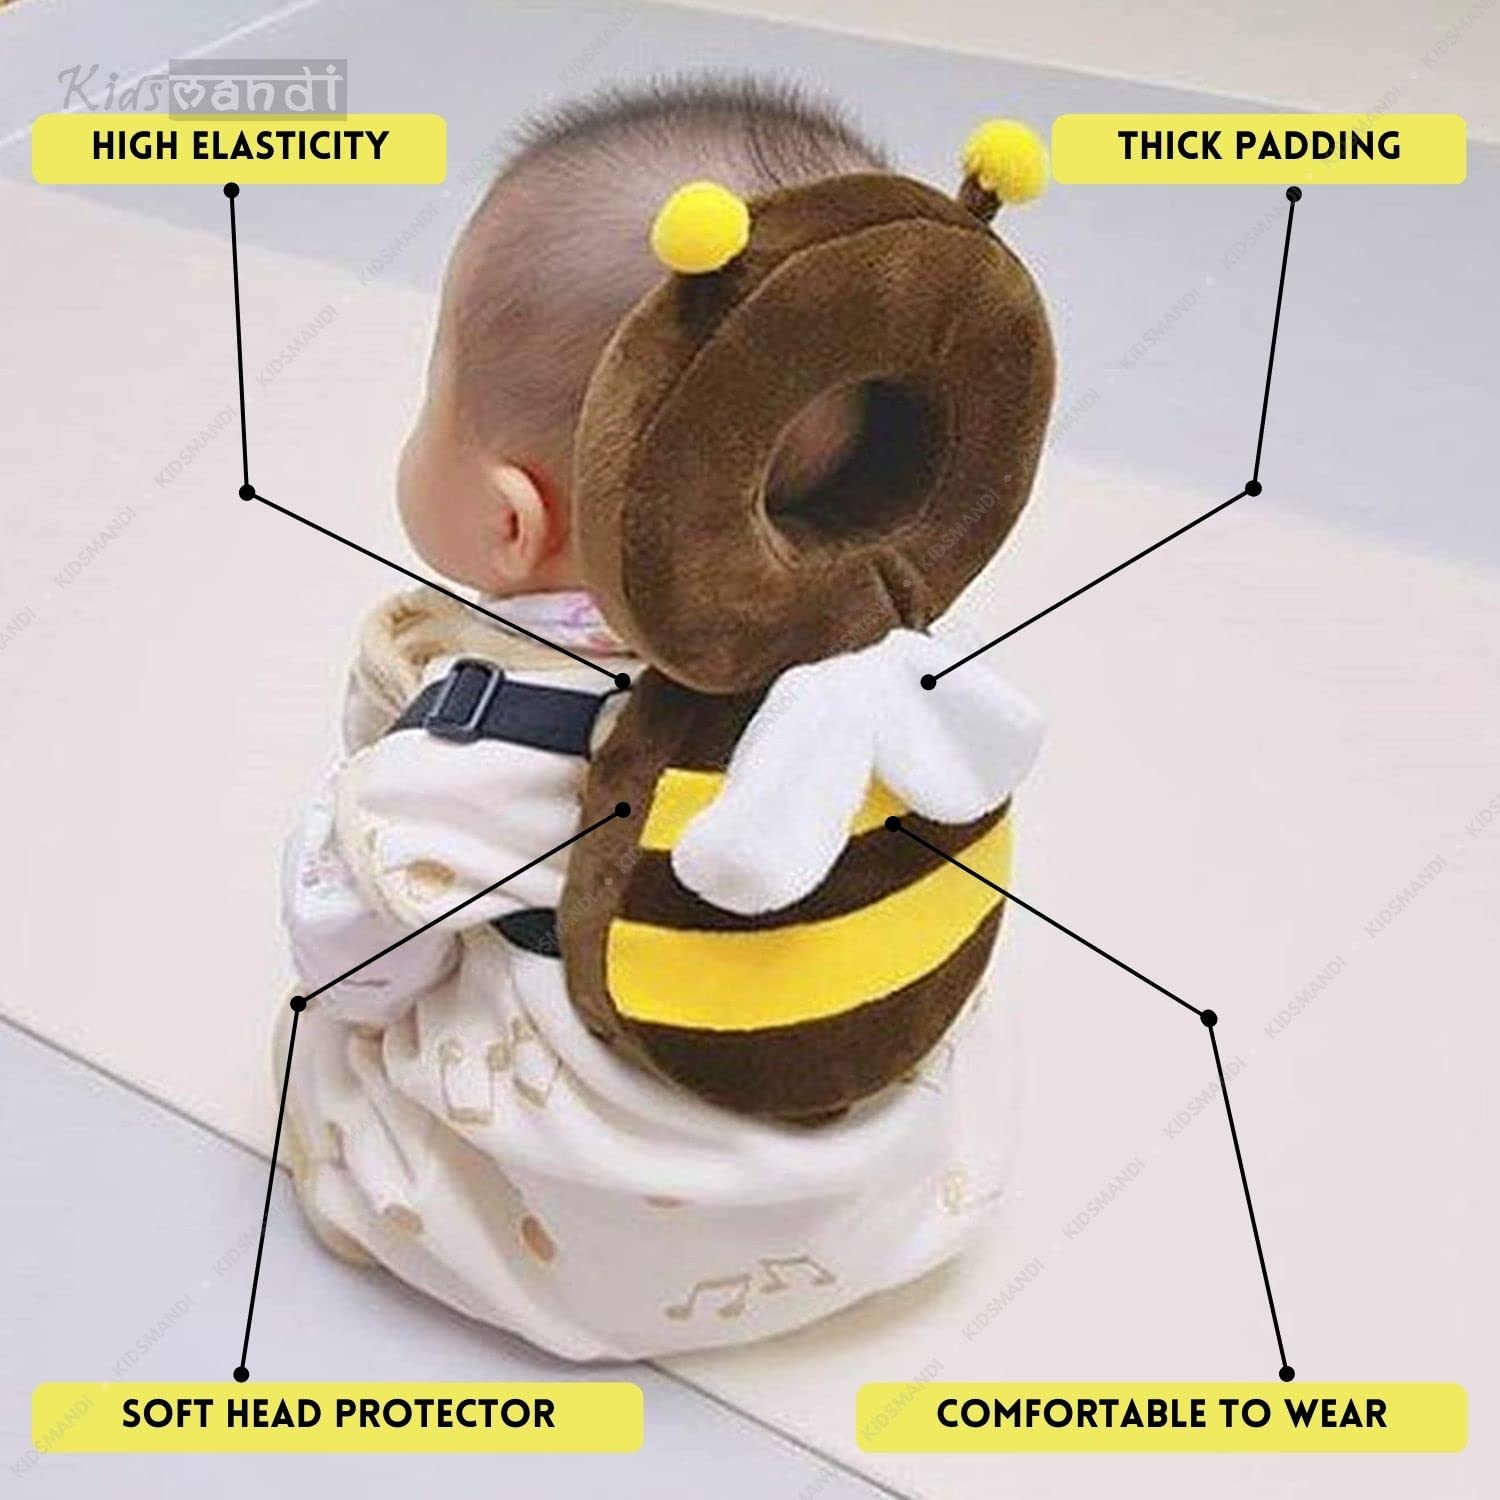 Kids Mandi baby head protector cushioned plush toy for crawling.